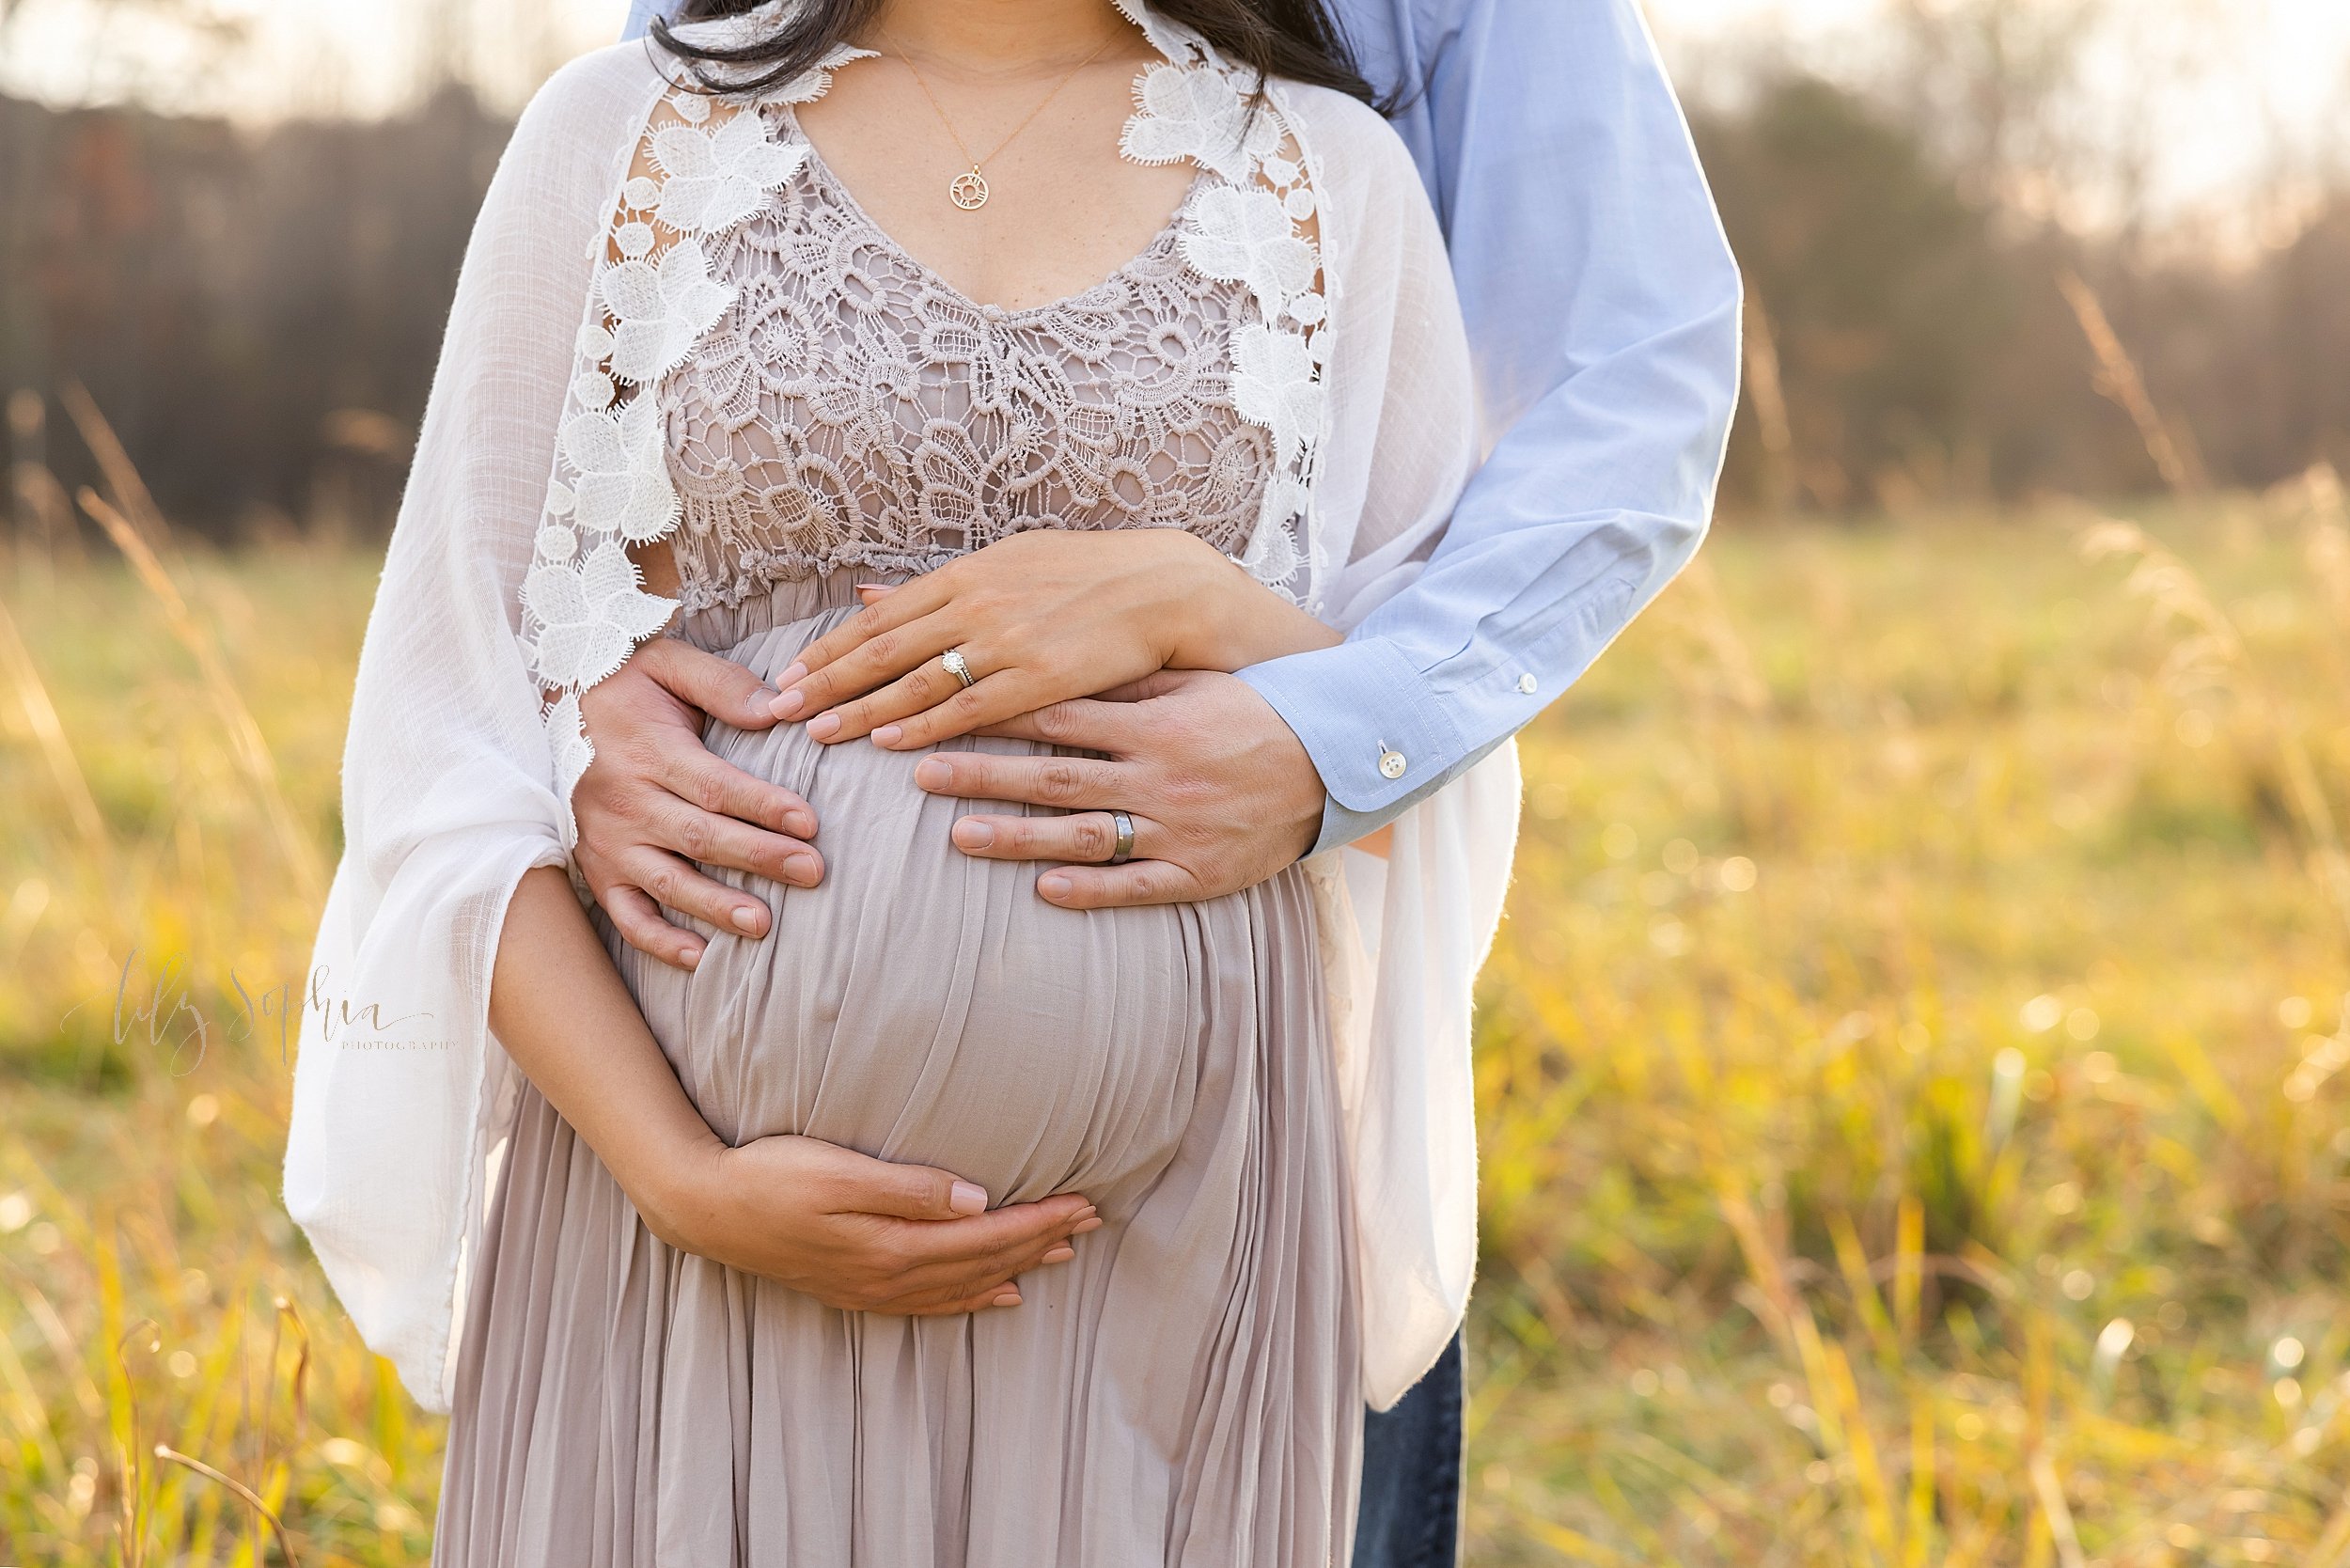  Close-up maternity photo of a husband standing behind his wife embracing his child in utero as his wife frames her belly with her hands taken in autumn in an Atlanta field at sunset. 